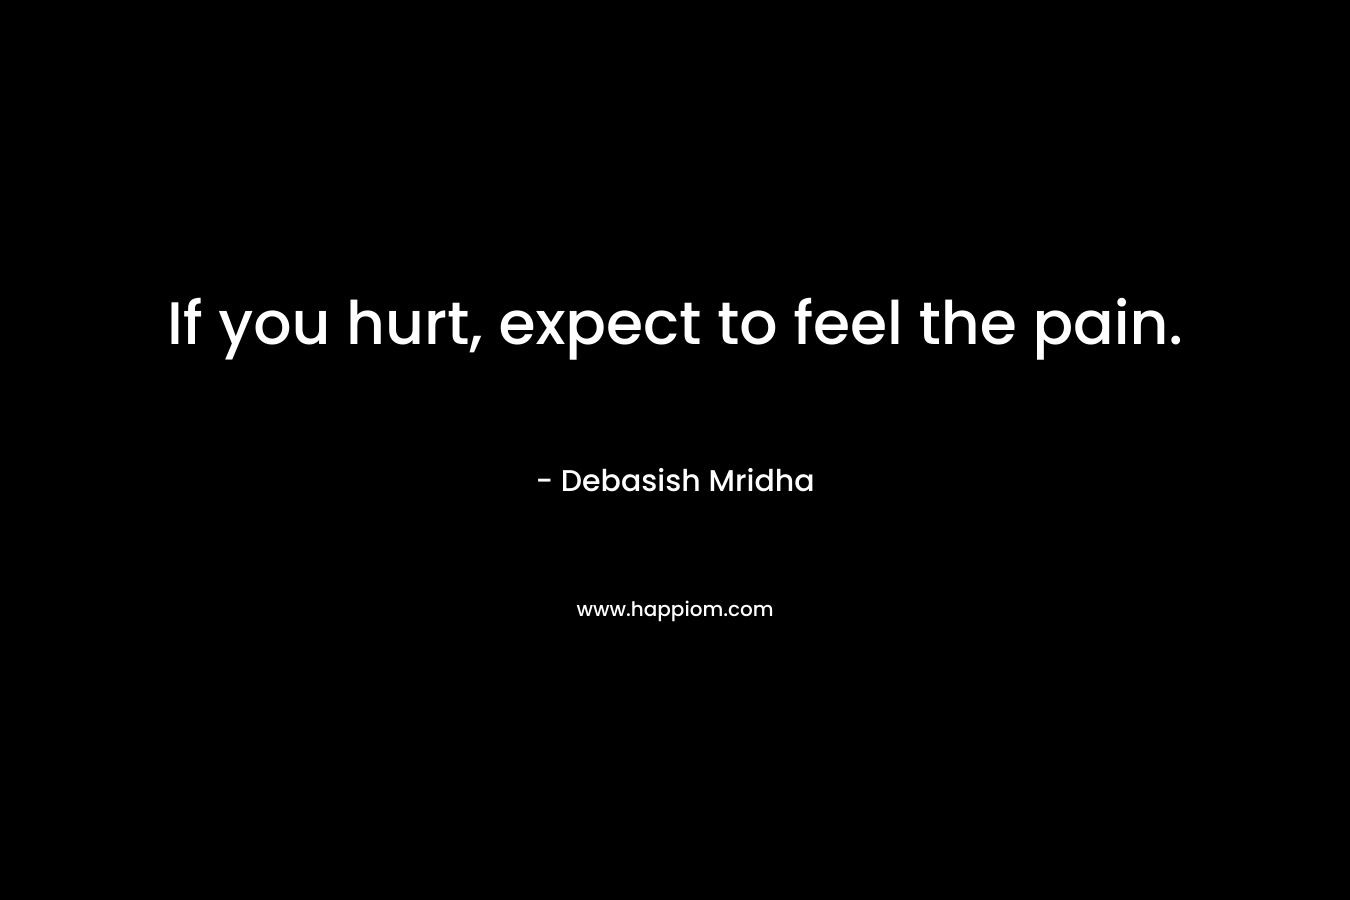 If you hurt, expect to feel the pain.